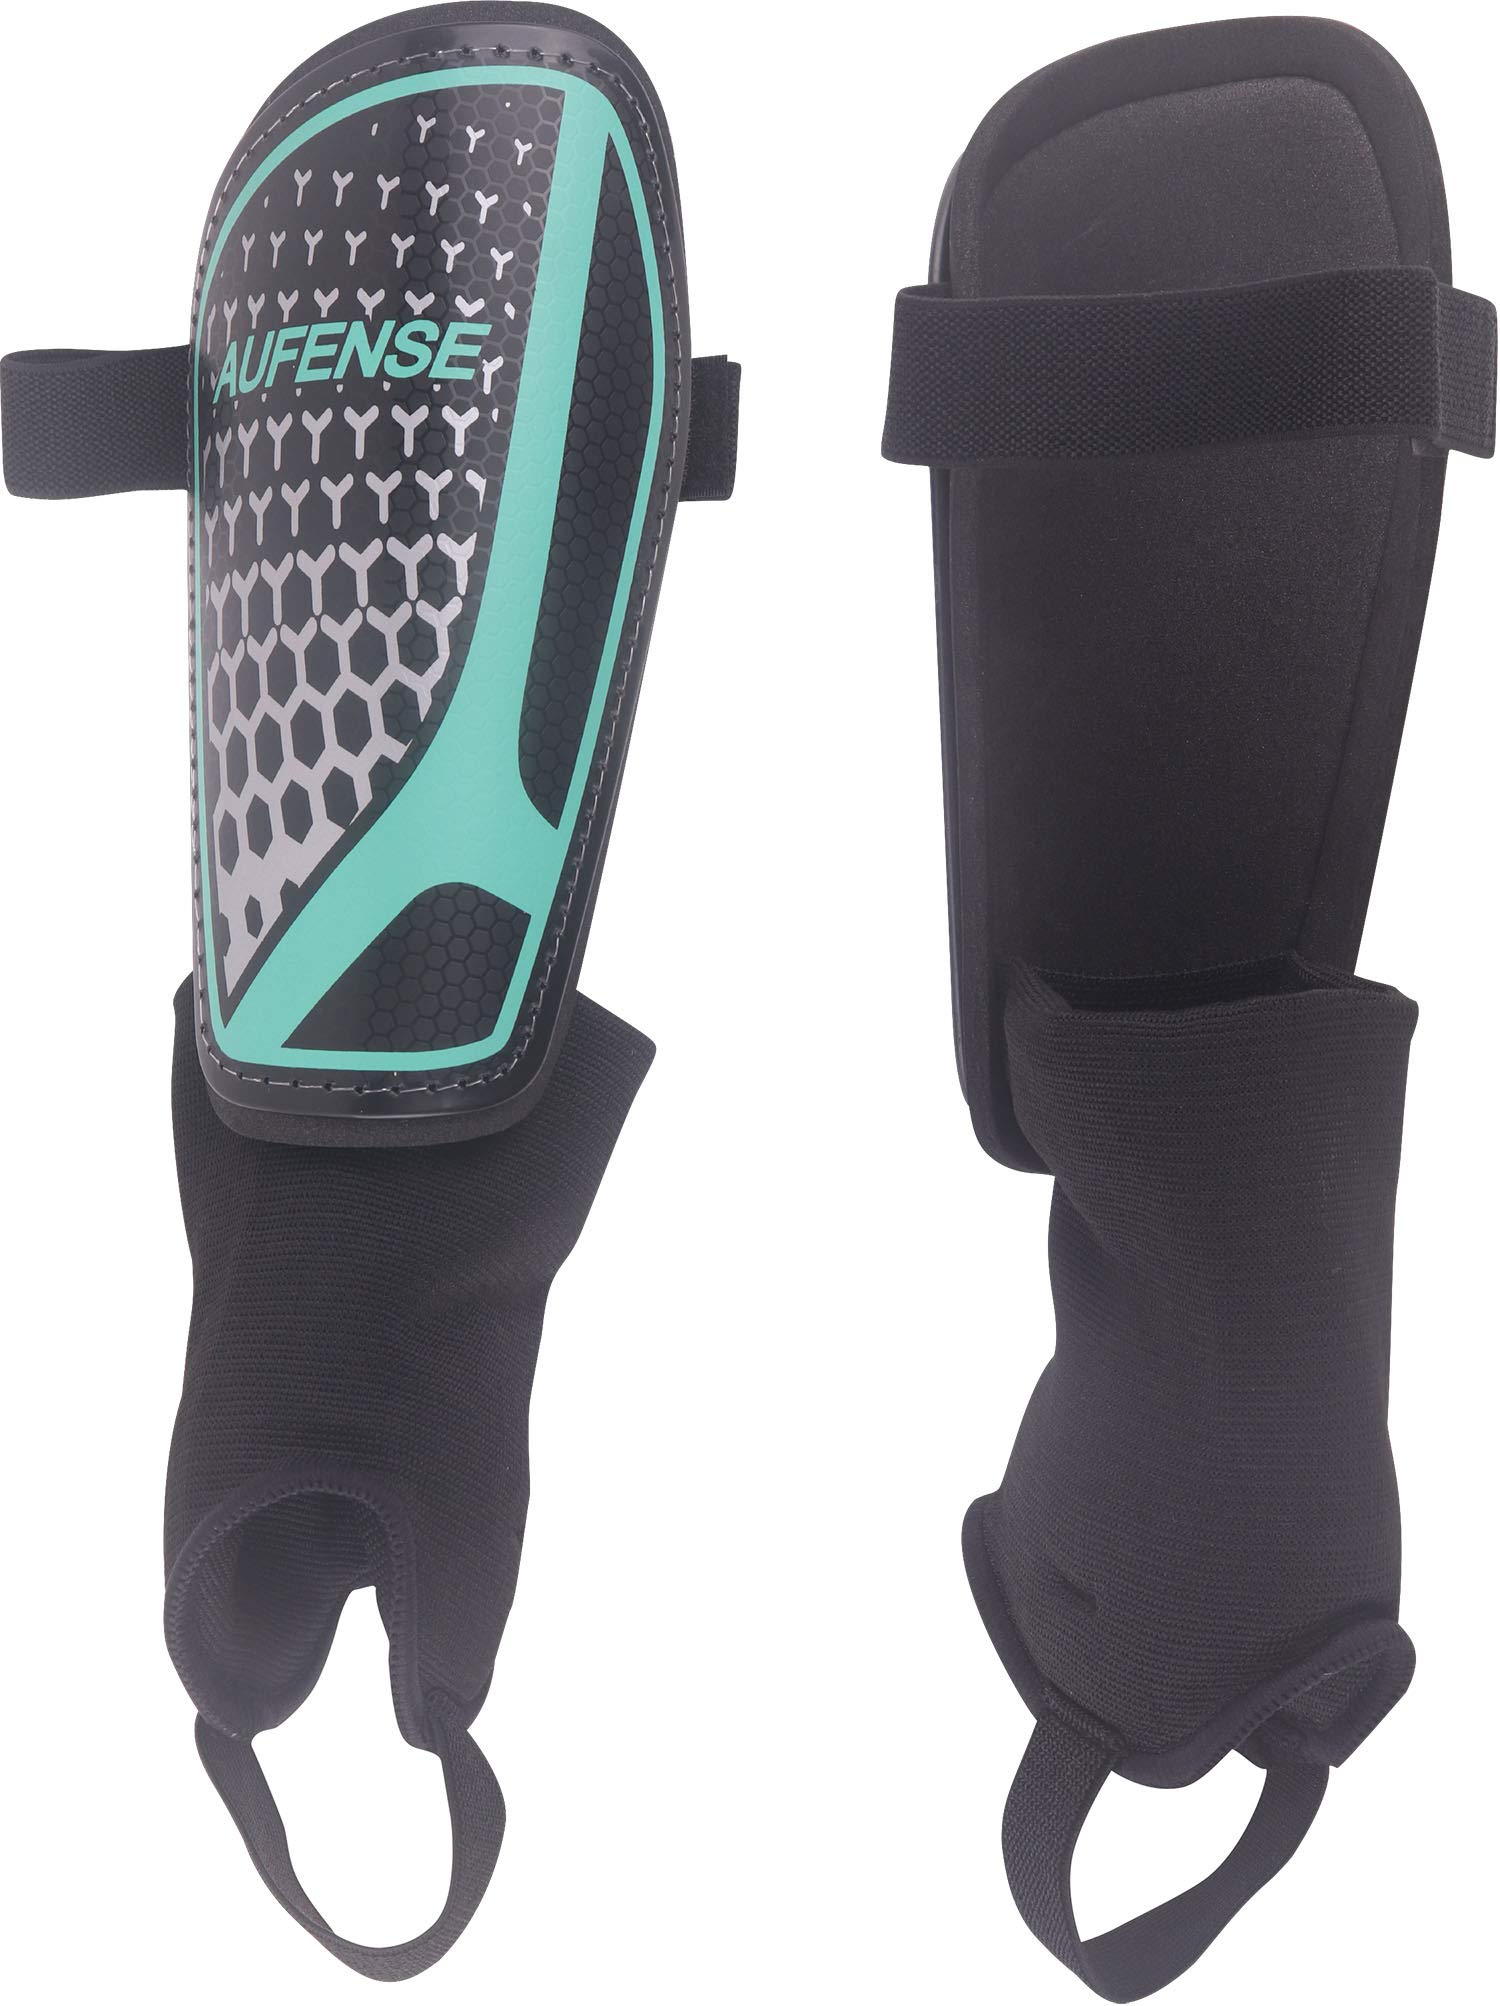 Aufense Soccer Shin Guards for Toddlers Kids - Durable Shin Pads with Ankle Protection for Ages 2-14 Boys and Girls (Black, S)